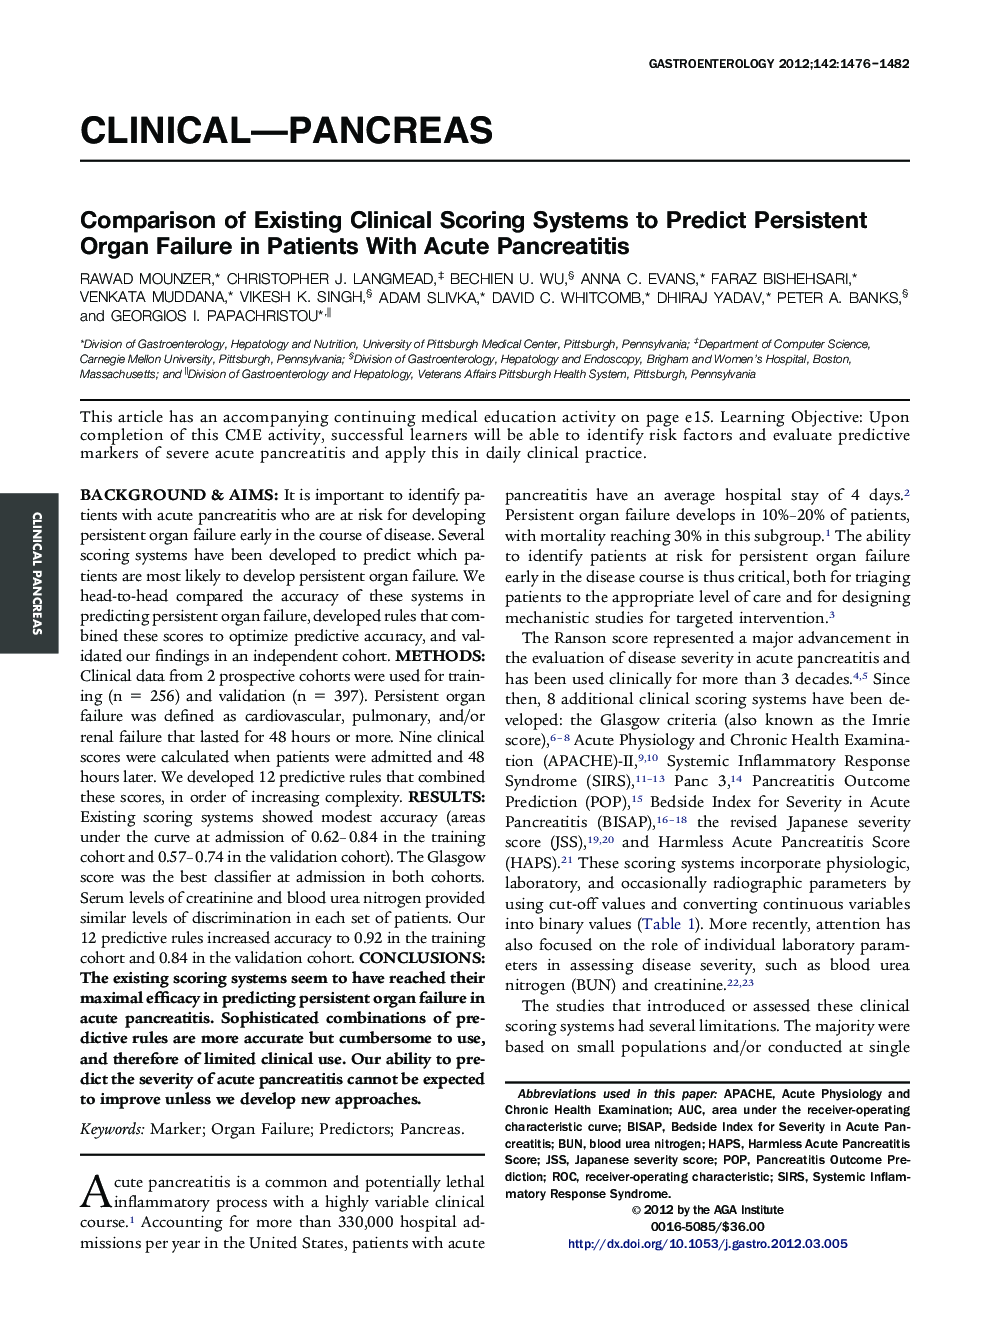 Comparison of Existing Clinical Scoring Systems to Predict Persistent Organ Failure in Patients With Acute Pancreatitis 